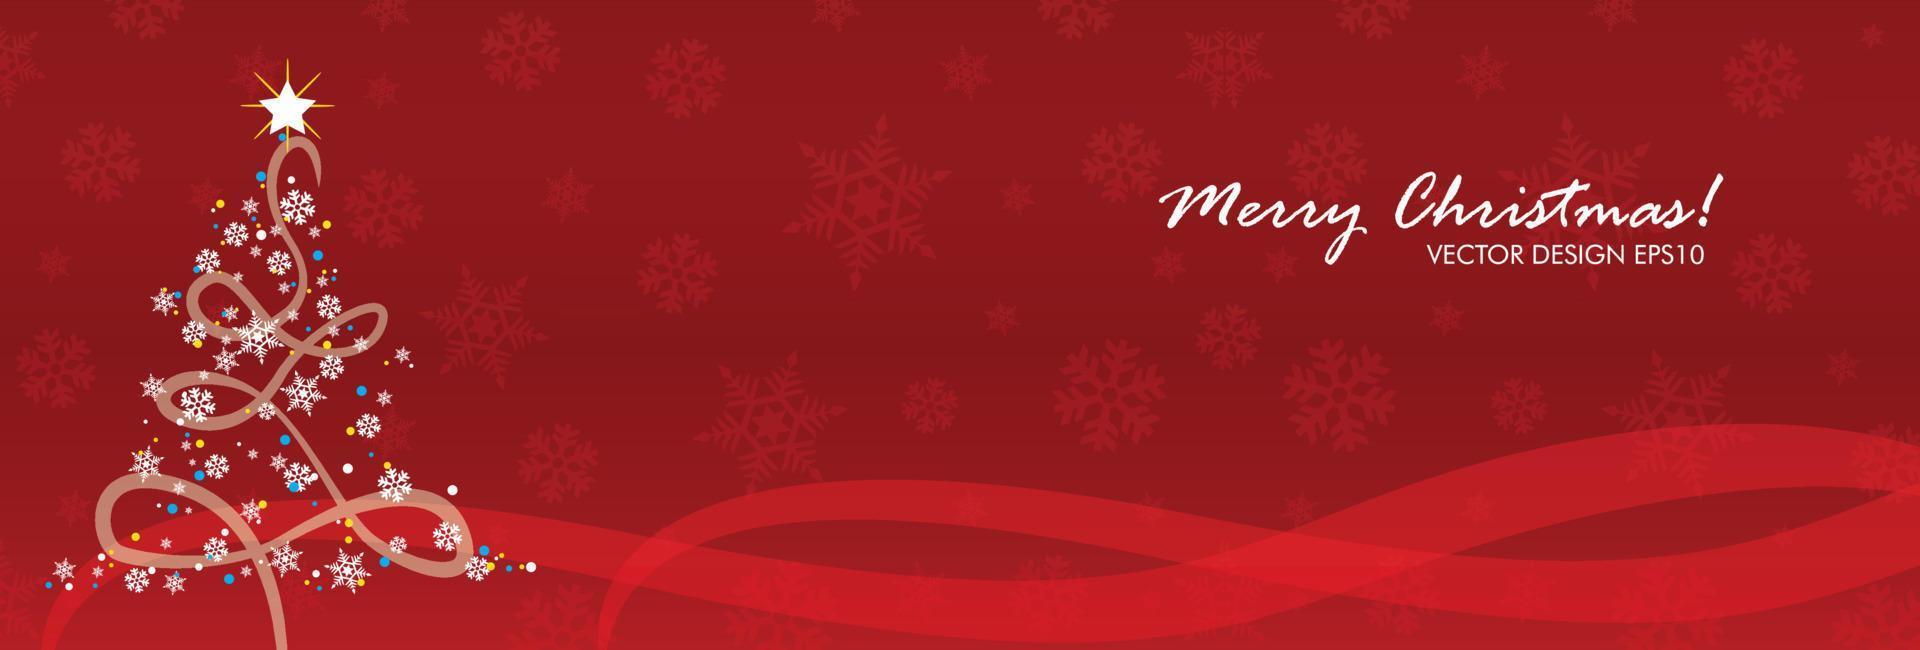 Merry Christmas web banner template with sparkling star tree, sales and offers vector